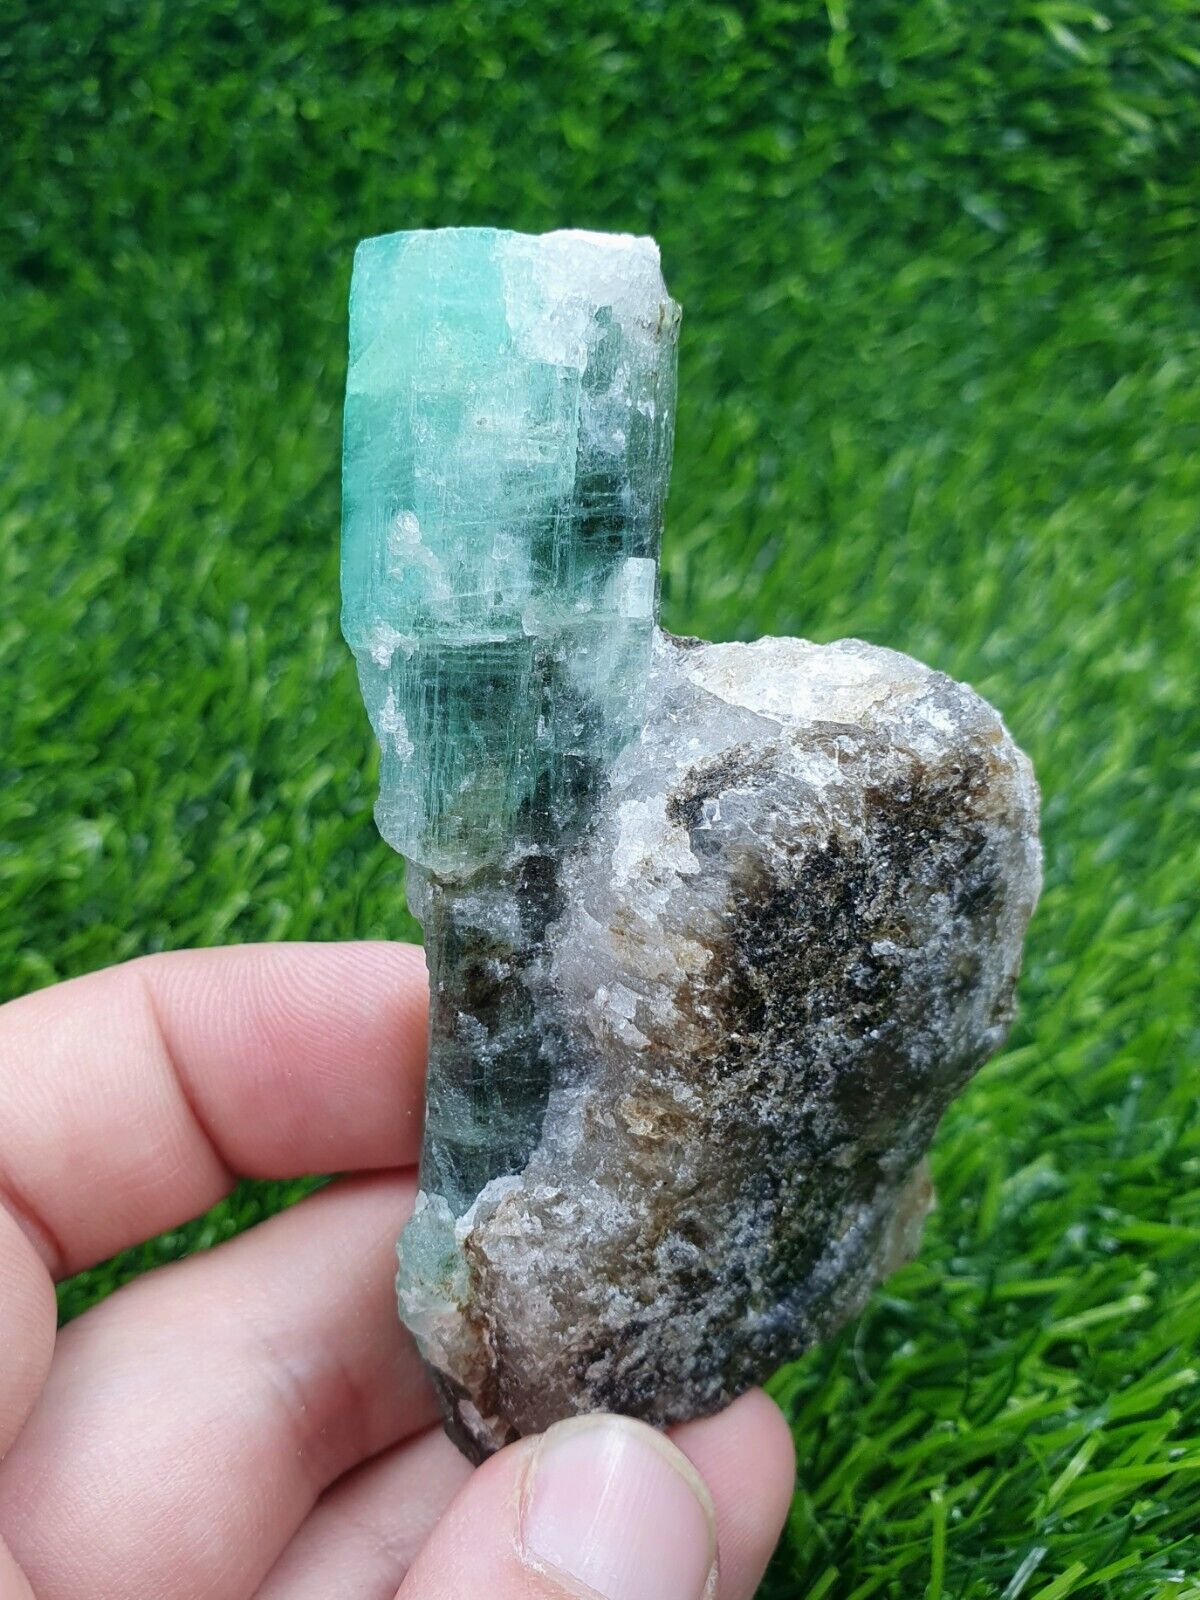 Emerald Large Crystal On Matrix From Chatral Pakistan 